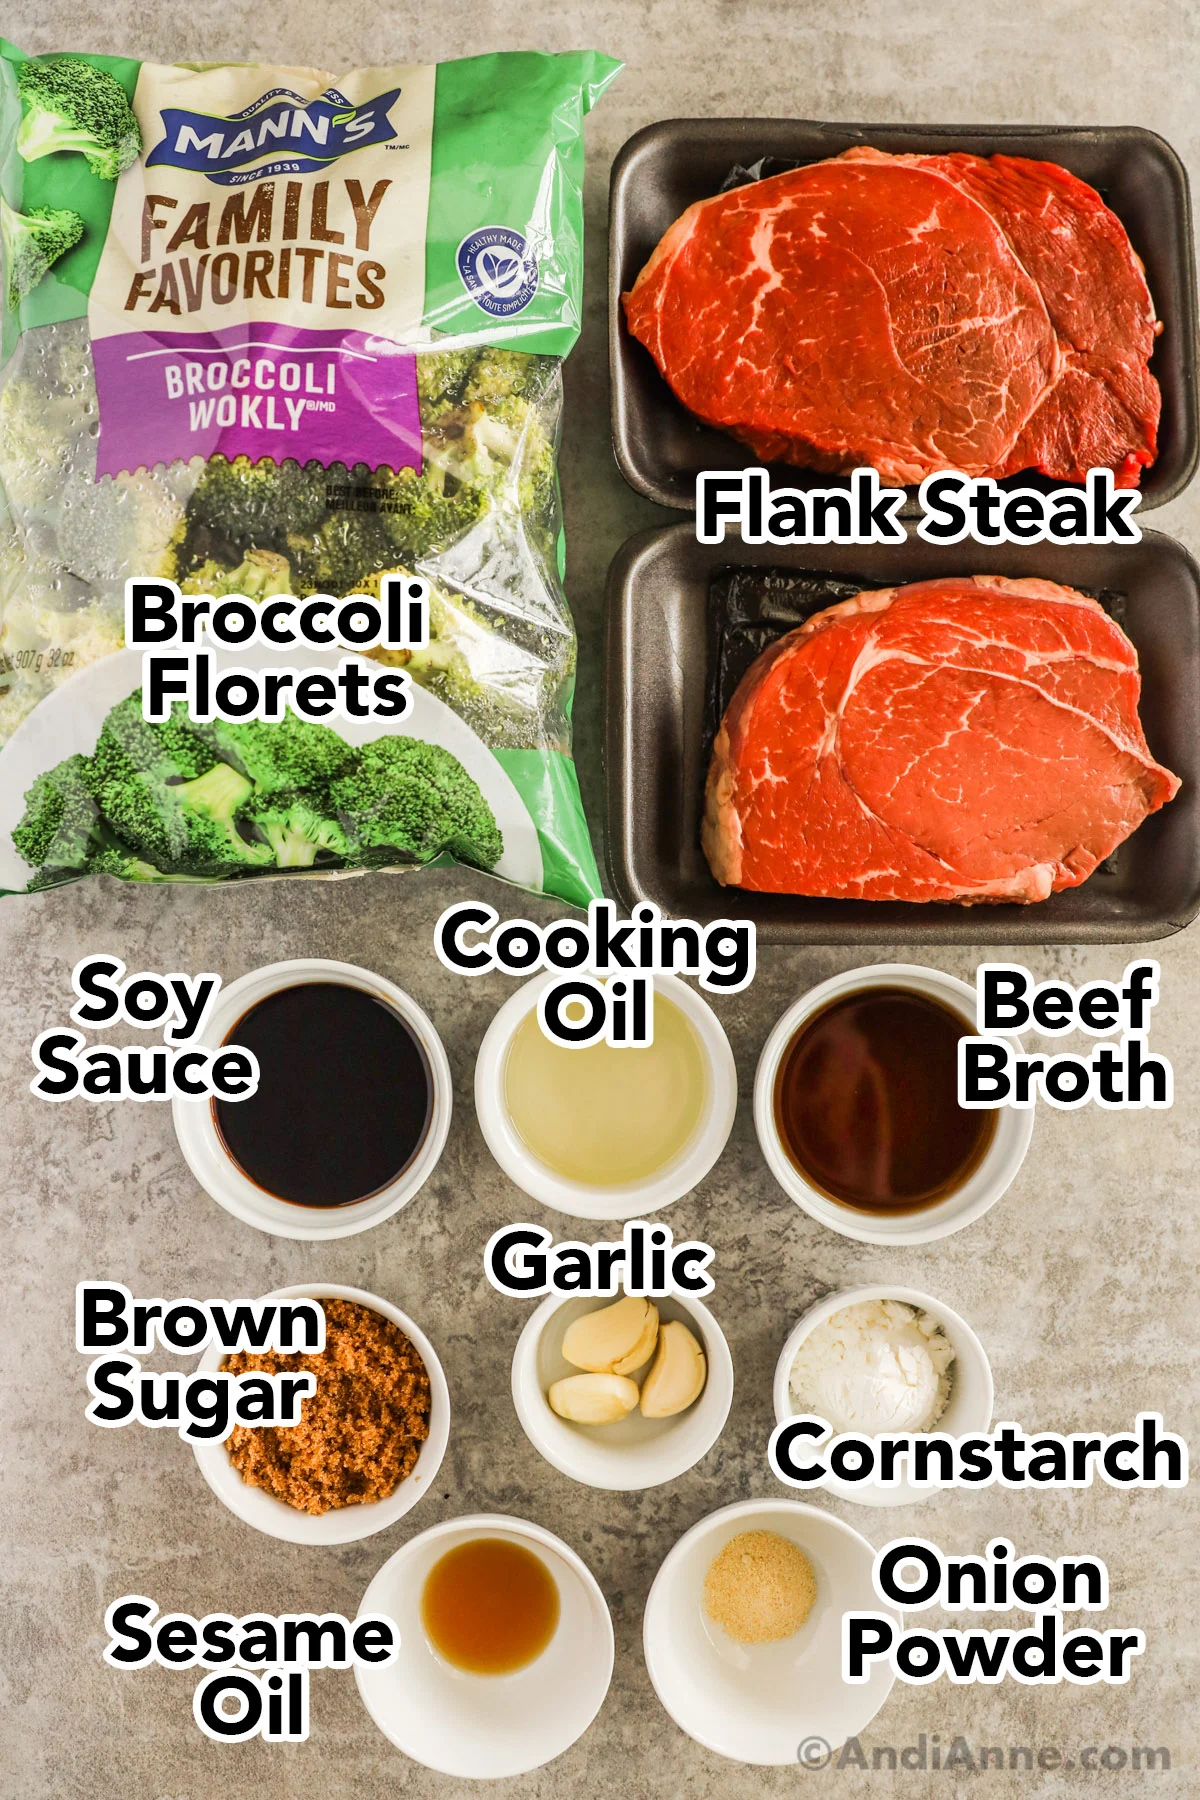 Recipe ingredients including bag of broccoli florets, two raw flank steaks, and small bowls of soy sauce, cooking oil, beef broth, brown sugar, garlic, cornstarch, sesame oil and onion powder.